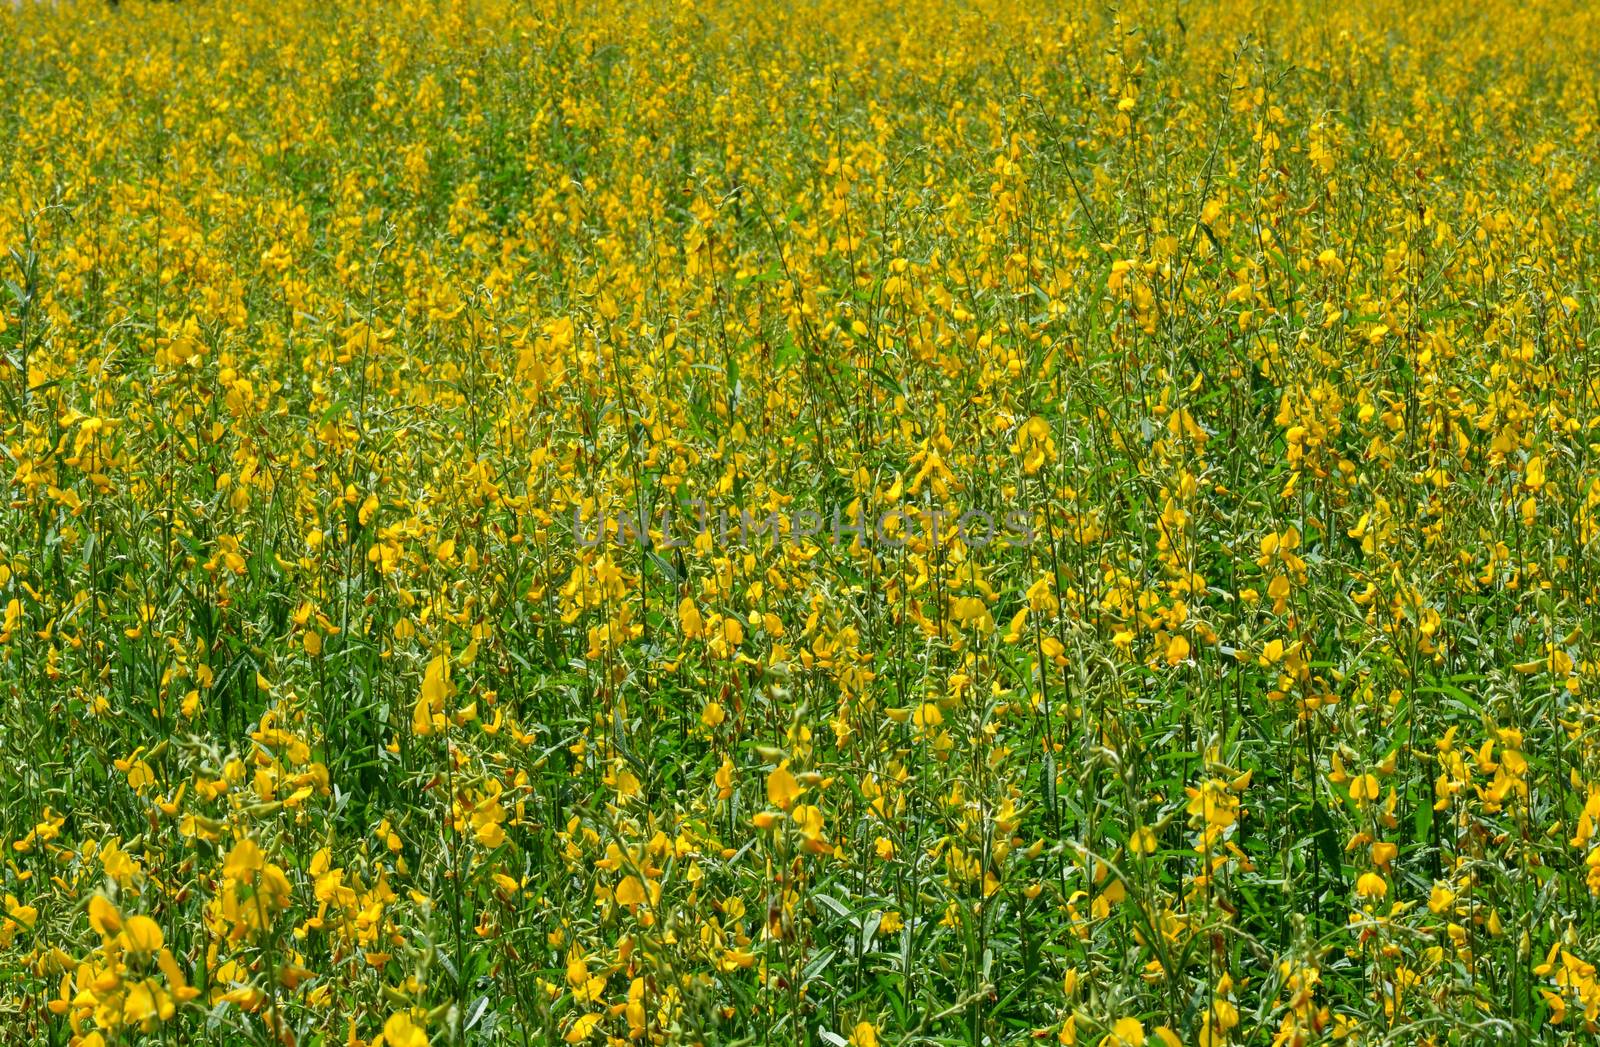 Farm Sunn Hemp flowers, Indian hemp flower field, Madras hemp or Crotalaria juncea is a tropical Asian plant used for green manure forage, organic soil building and cover crop applications